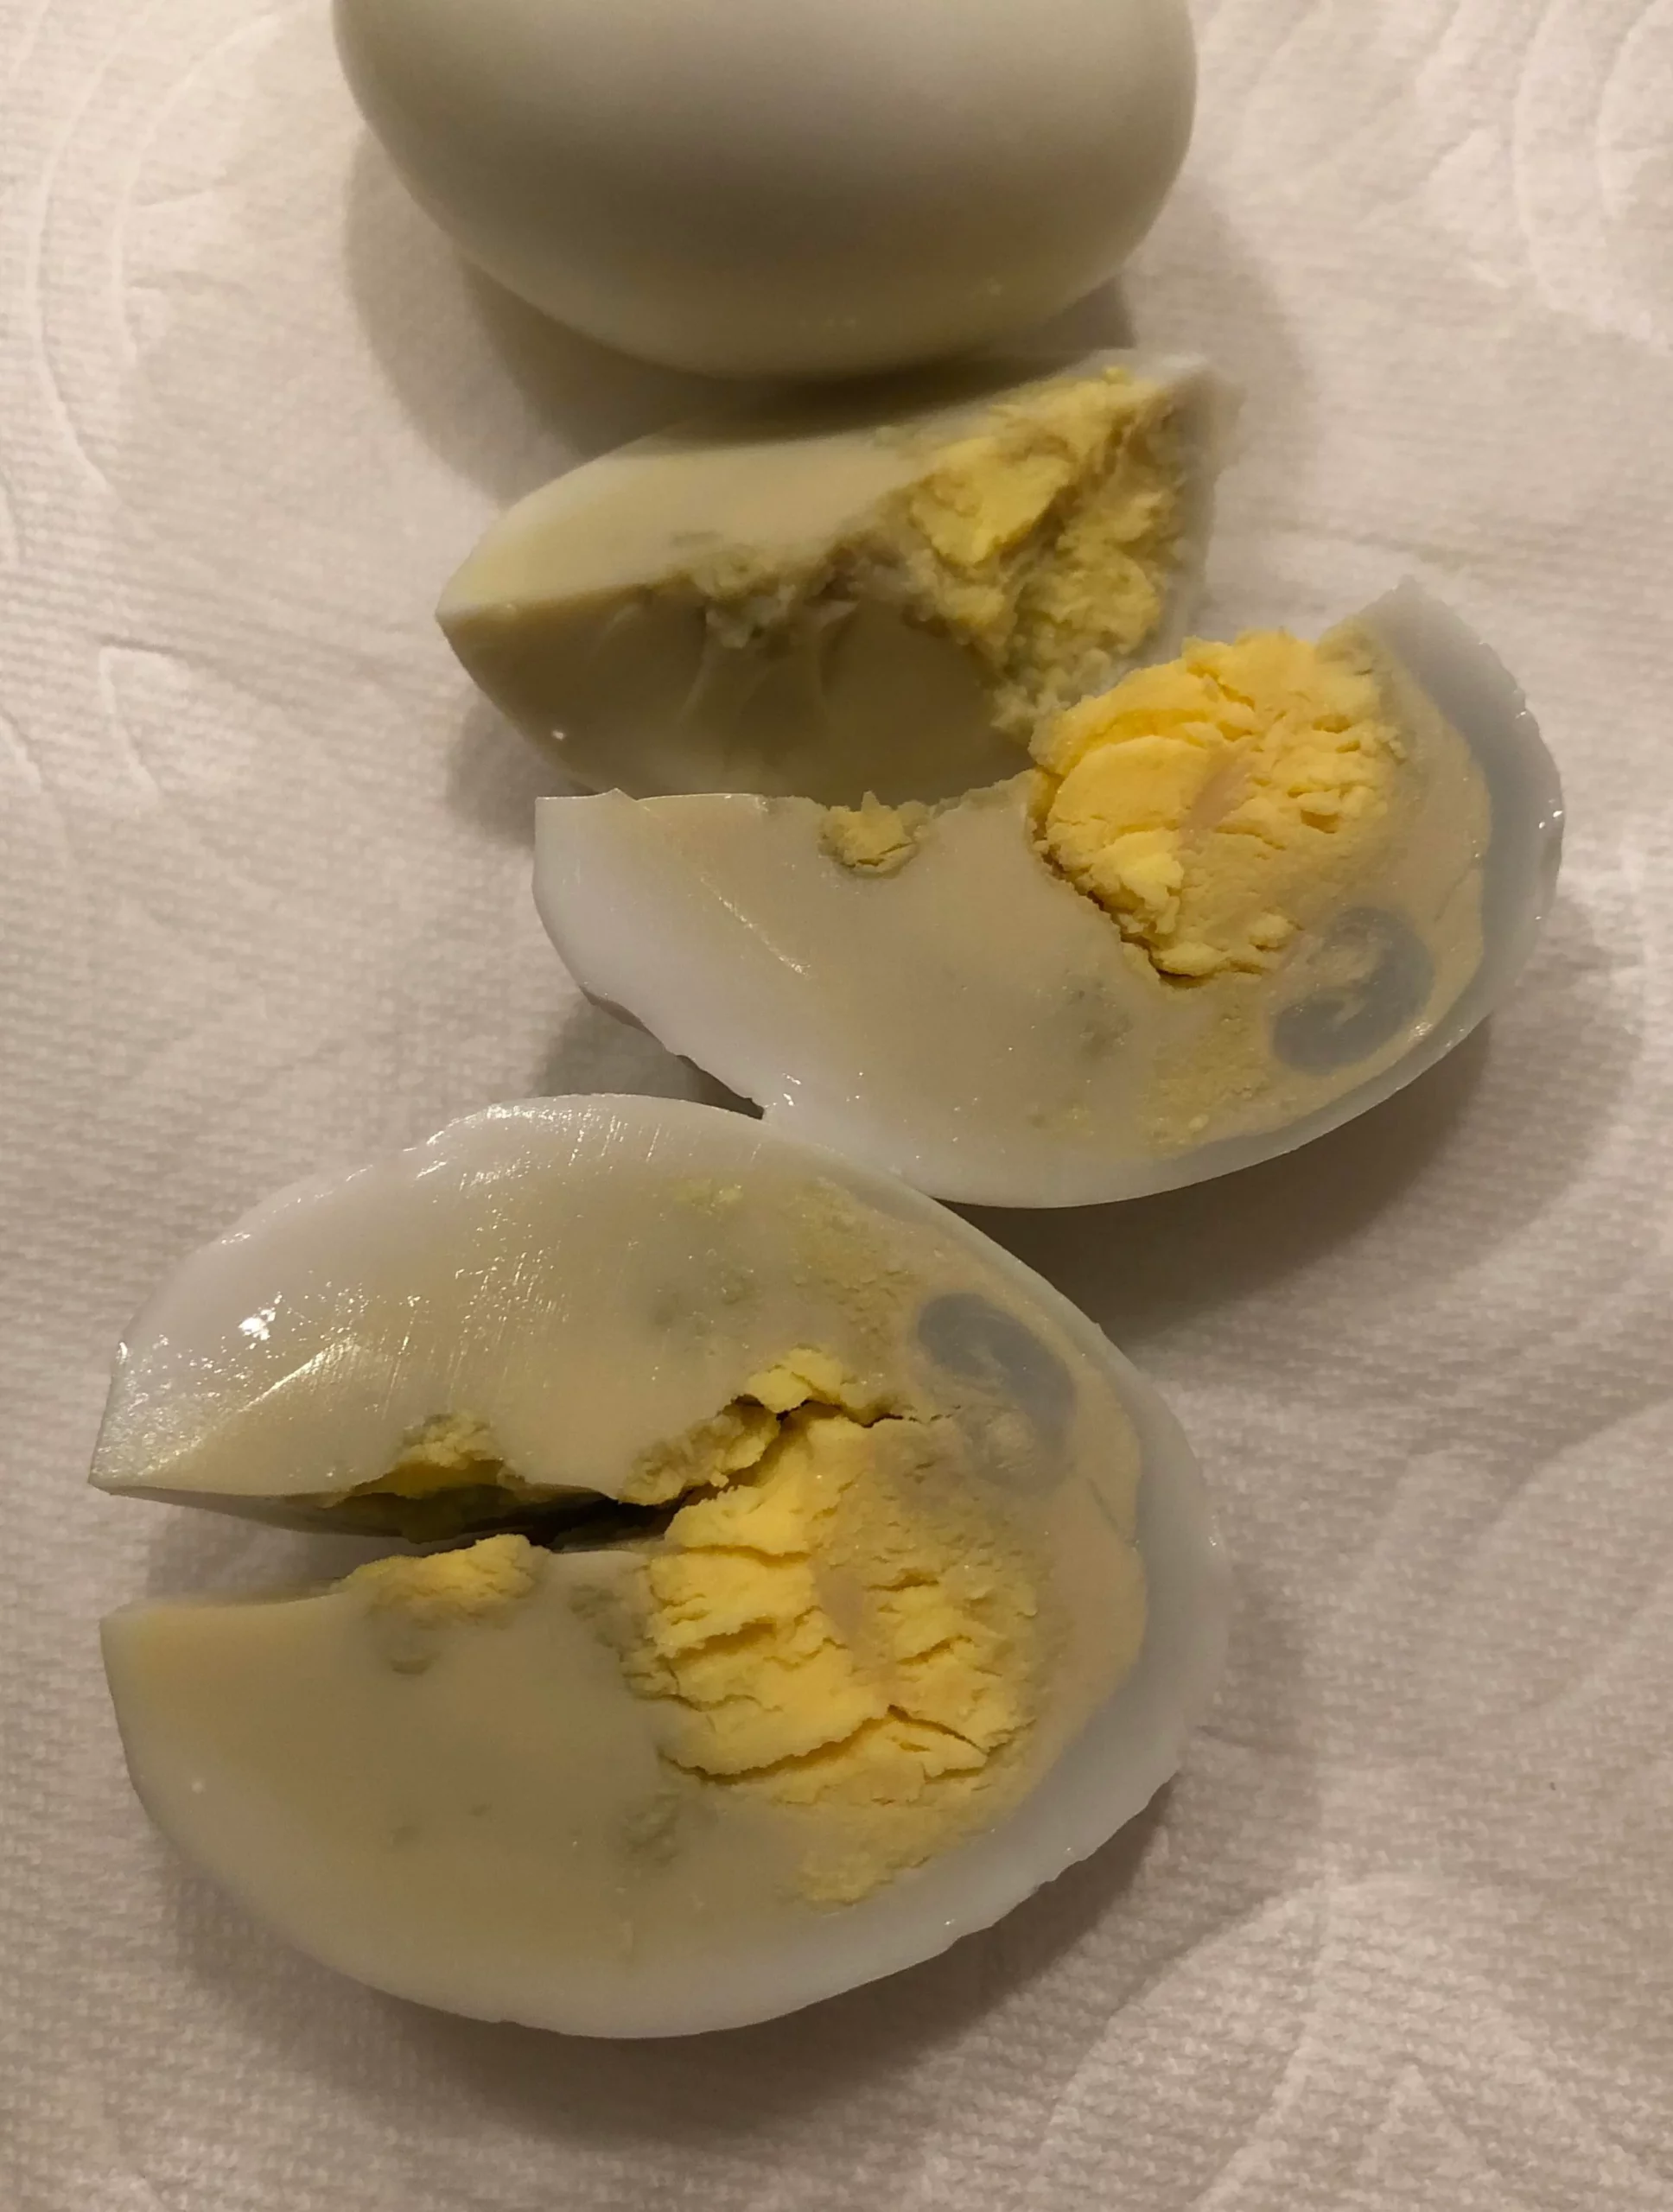 How to tell if hard boiled eggs are bad